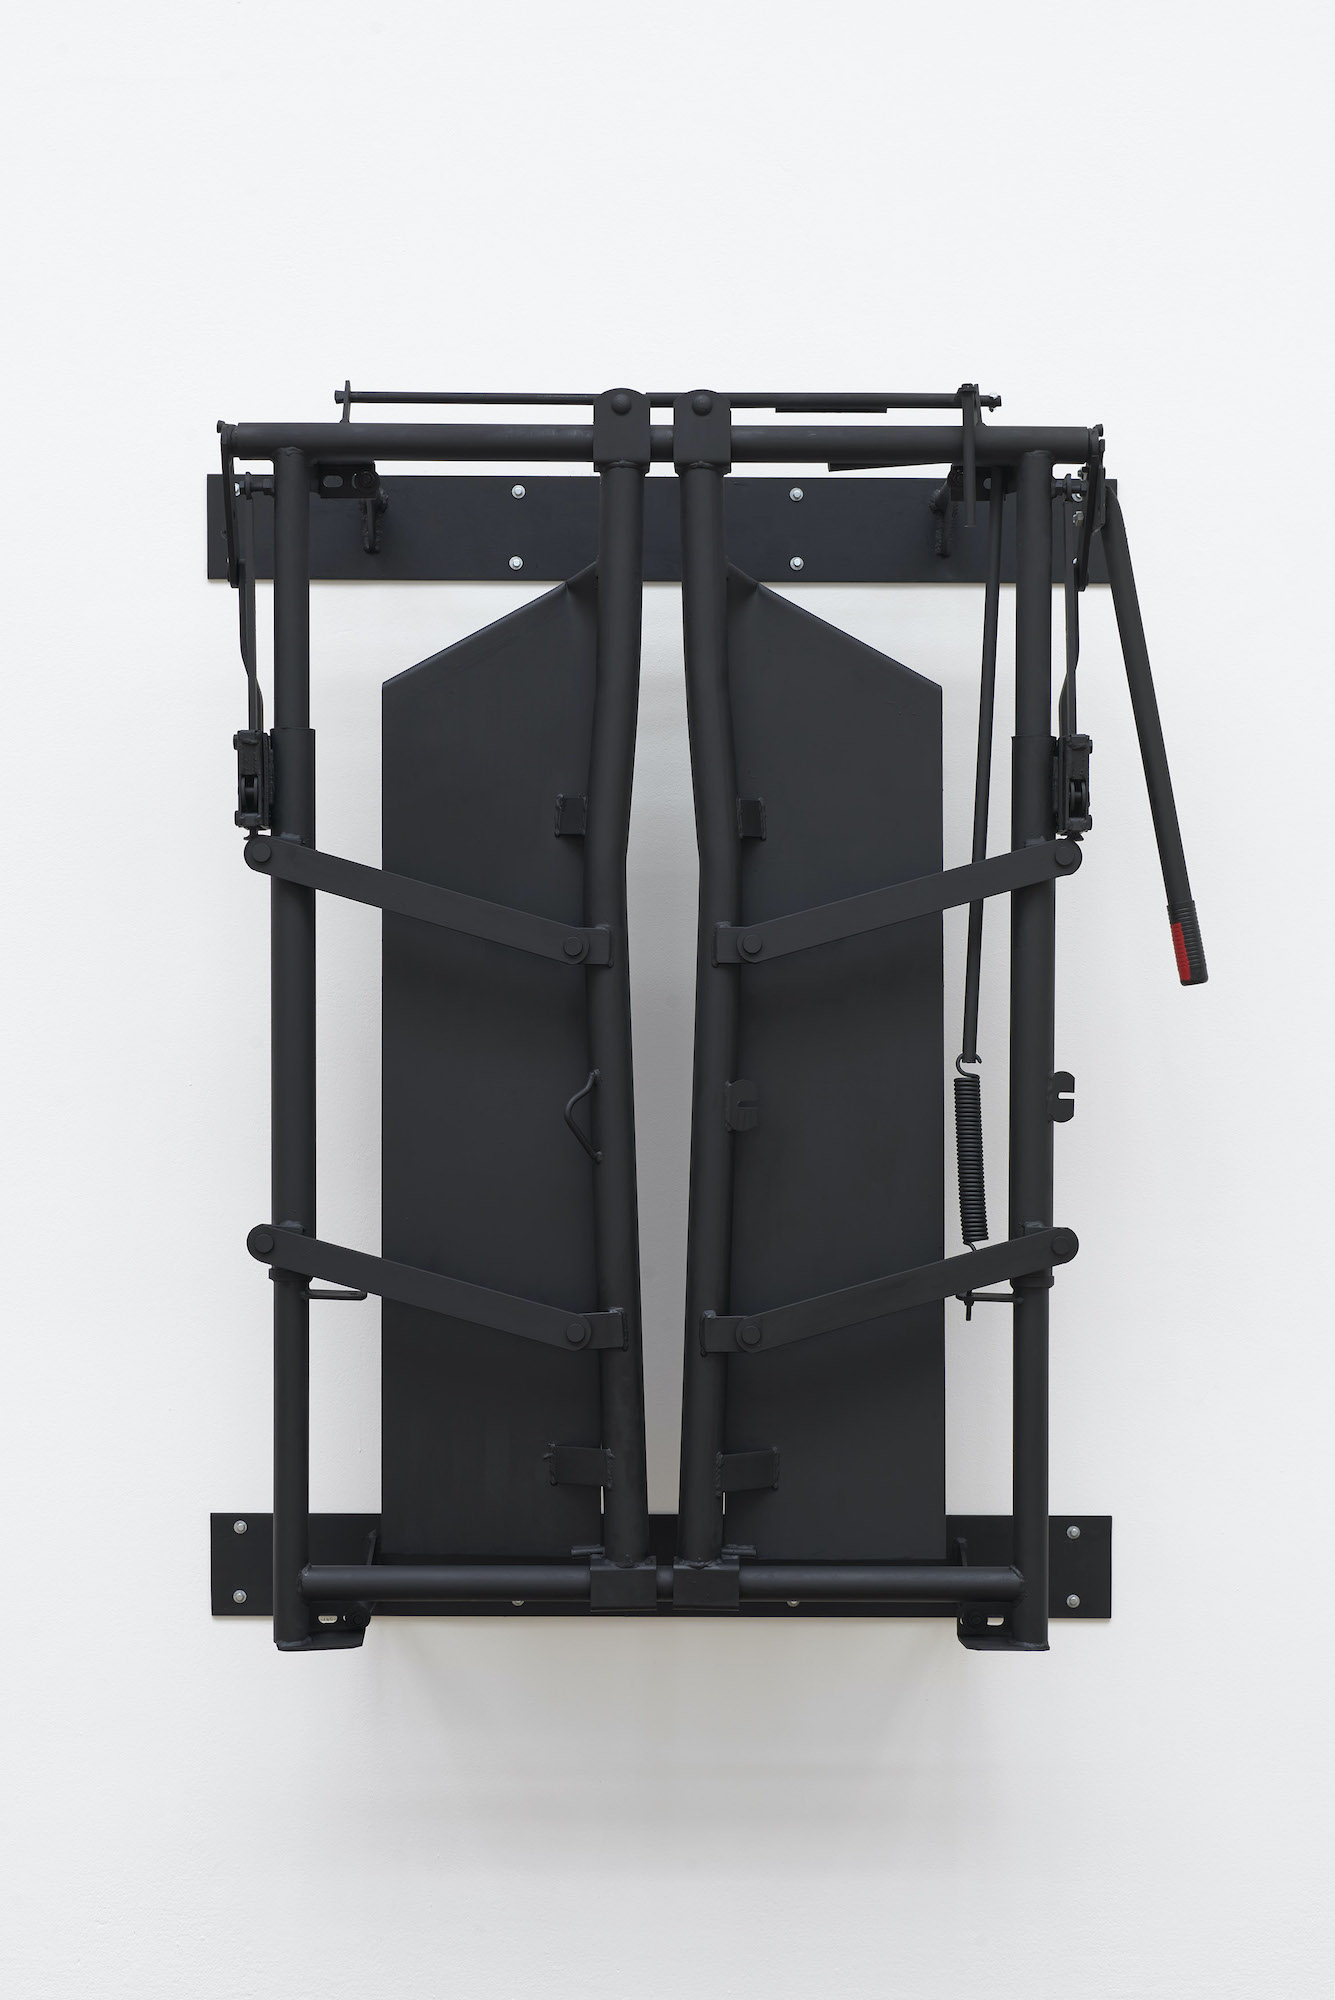 What looks like an industrial sled, or apparatus to restrain animals is painted all black and hangs against a blank white wall